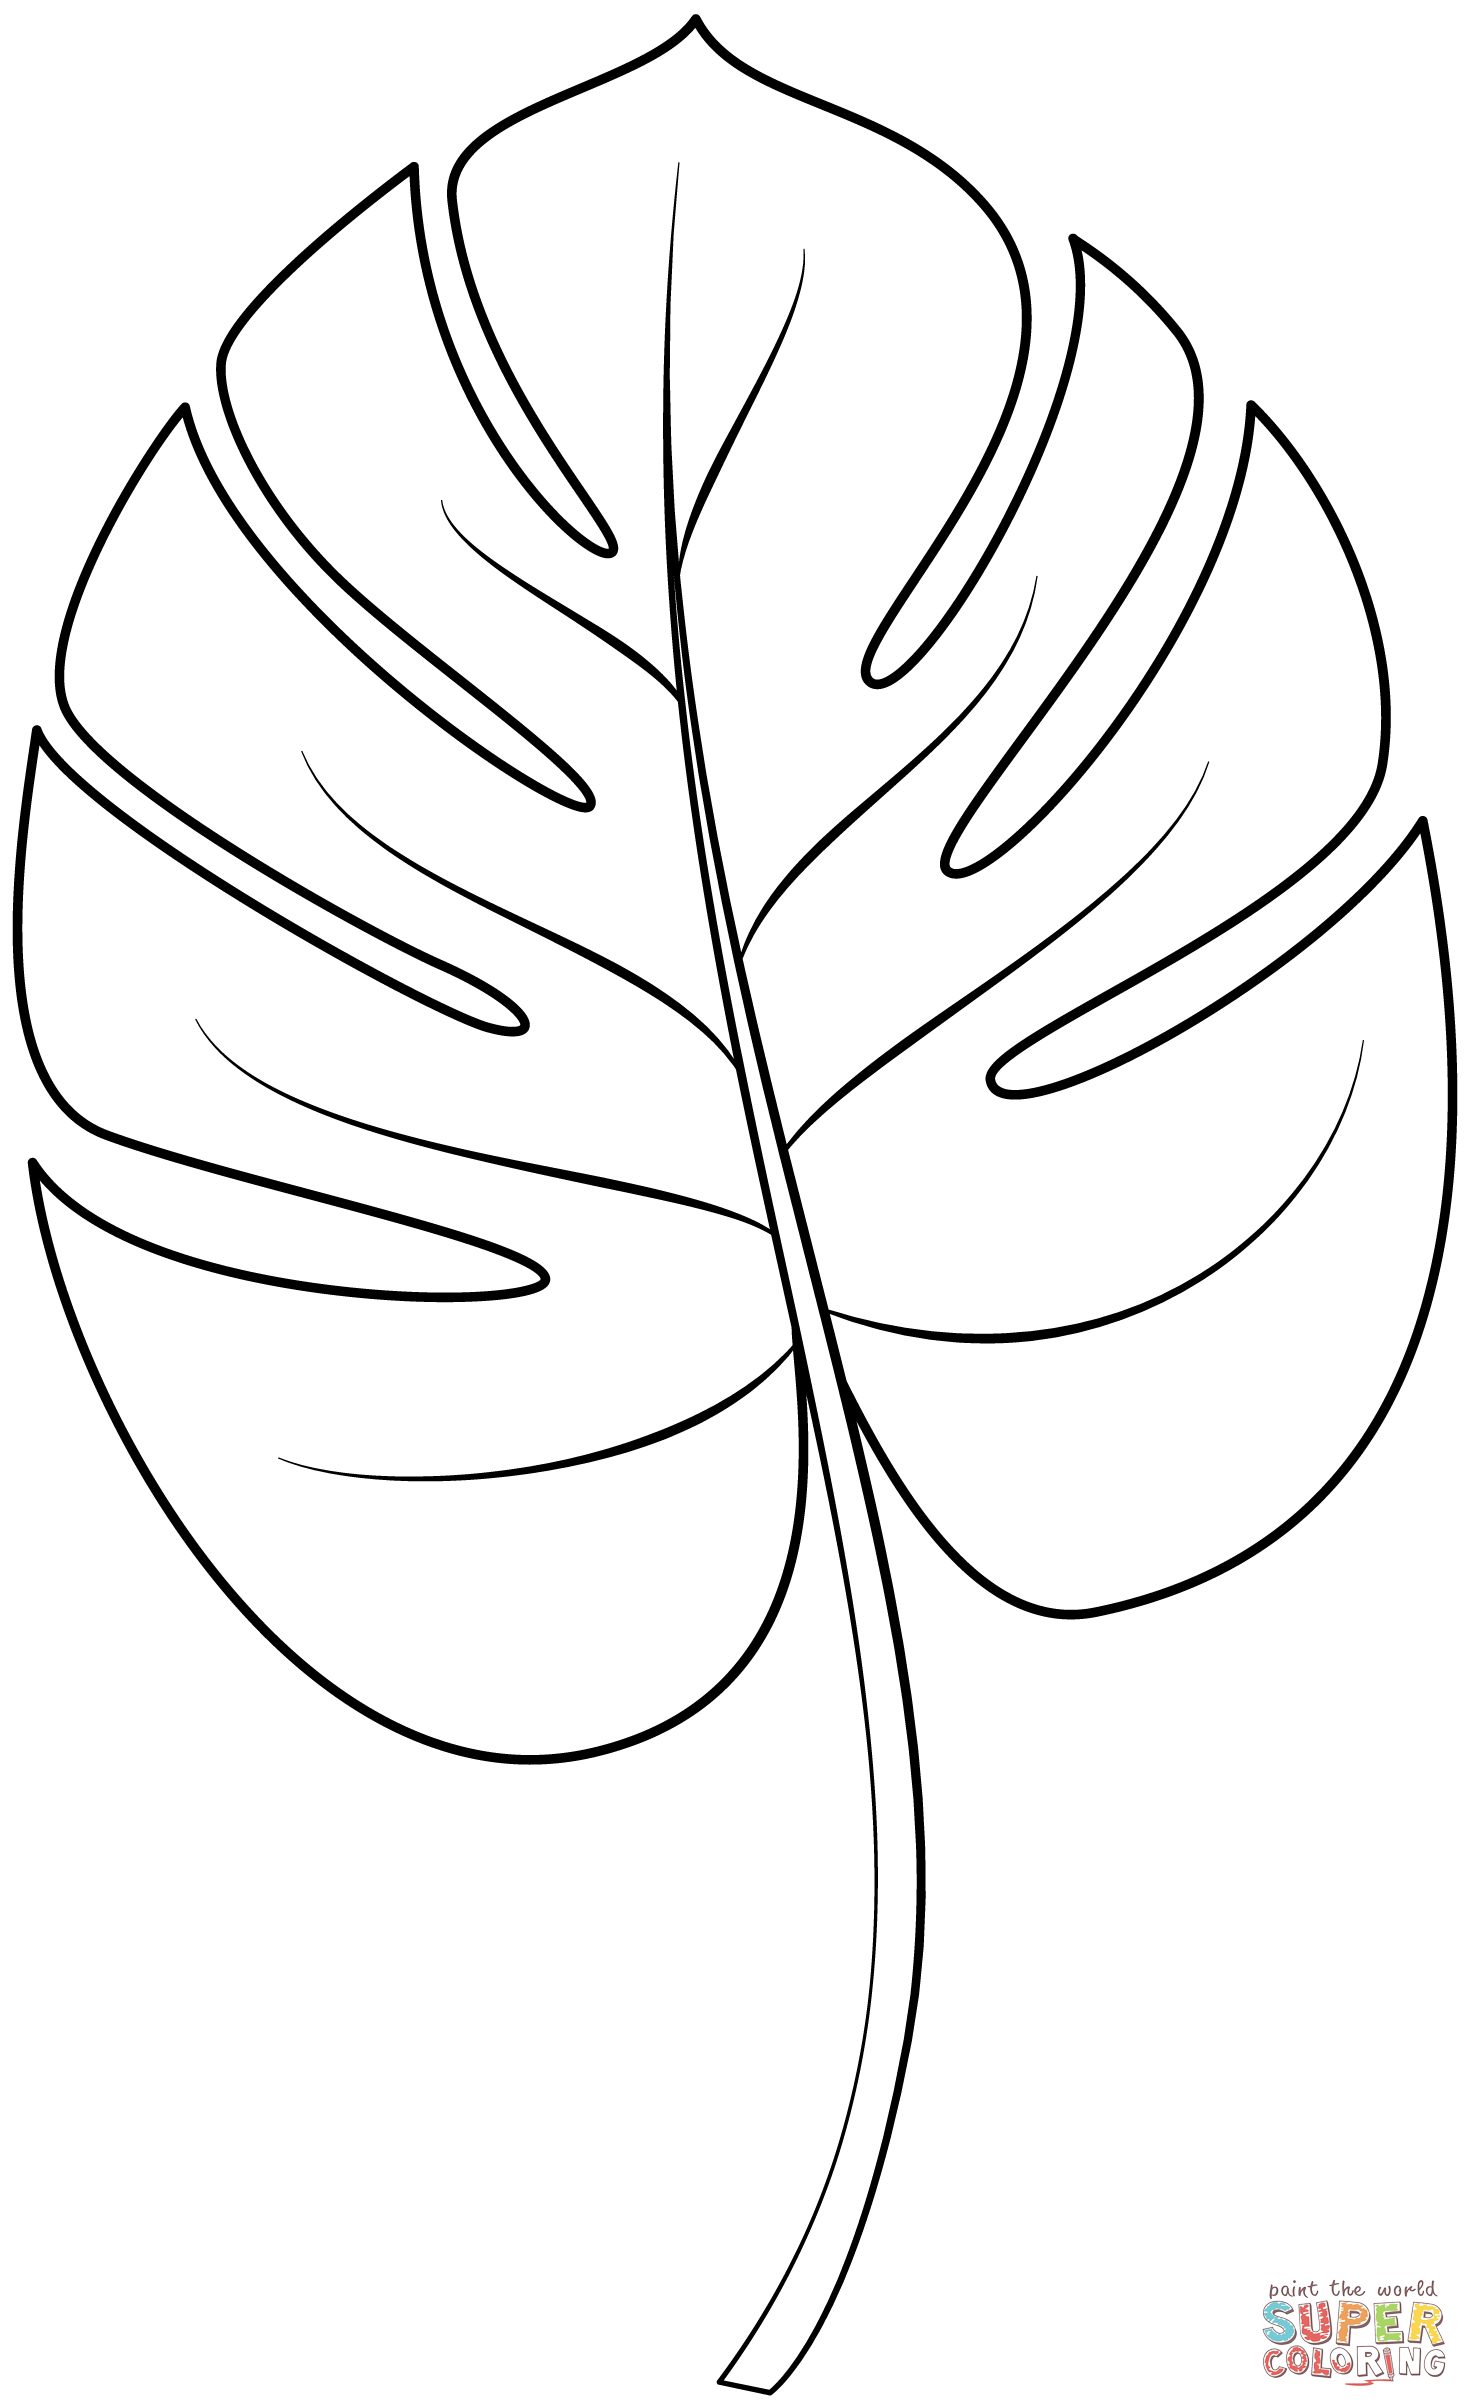 Tropical leaf coloring page free printable coloring pages